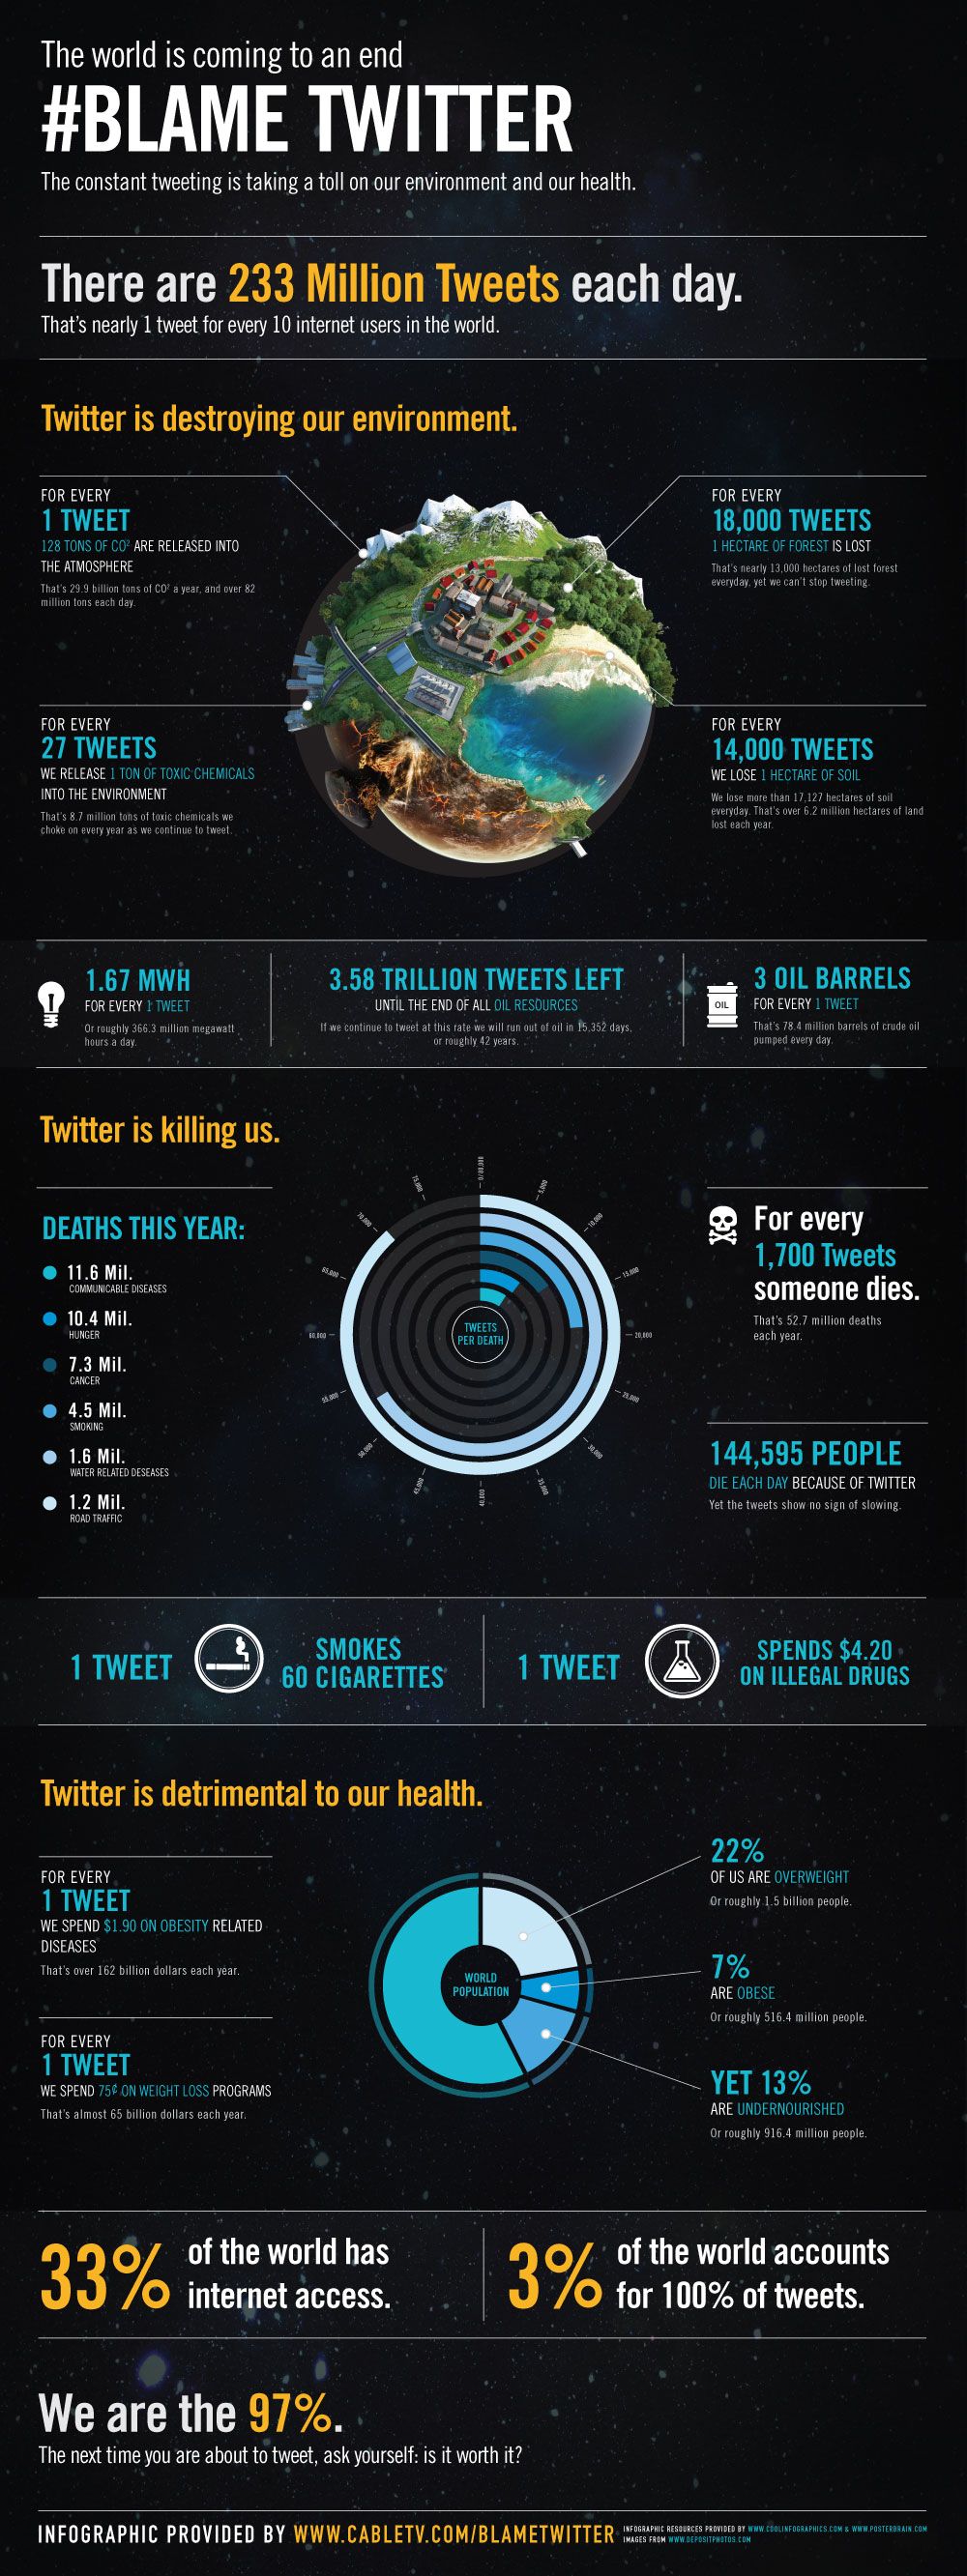 Blame Twitter for the World's Ills [INFOGRAPHIC]